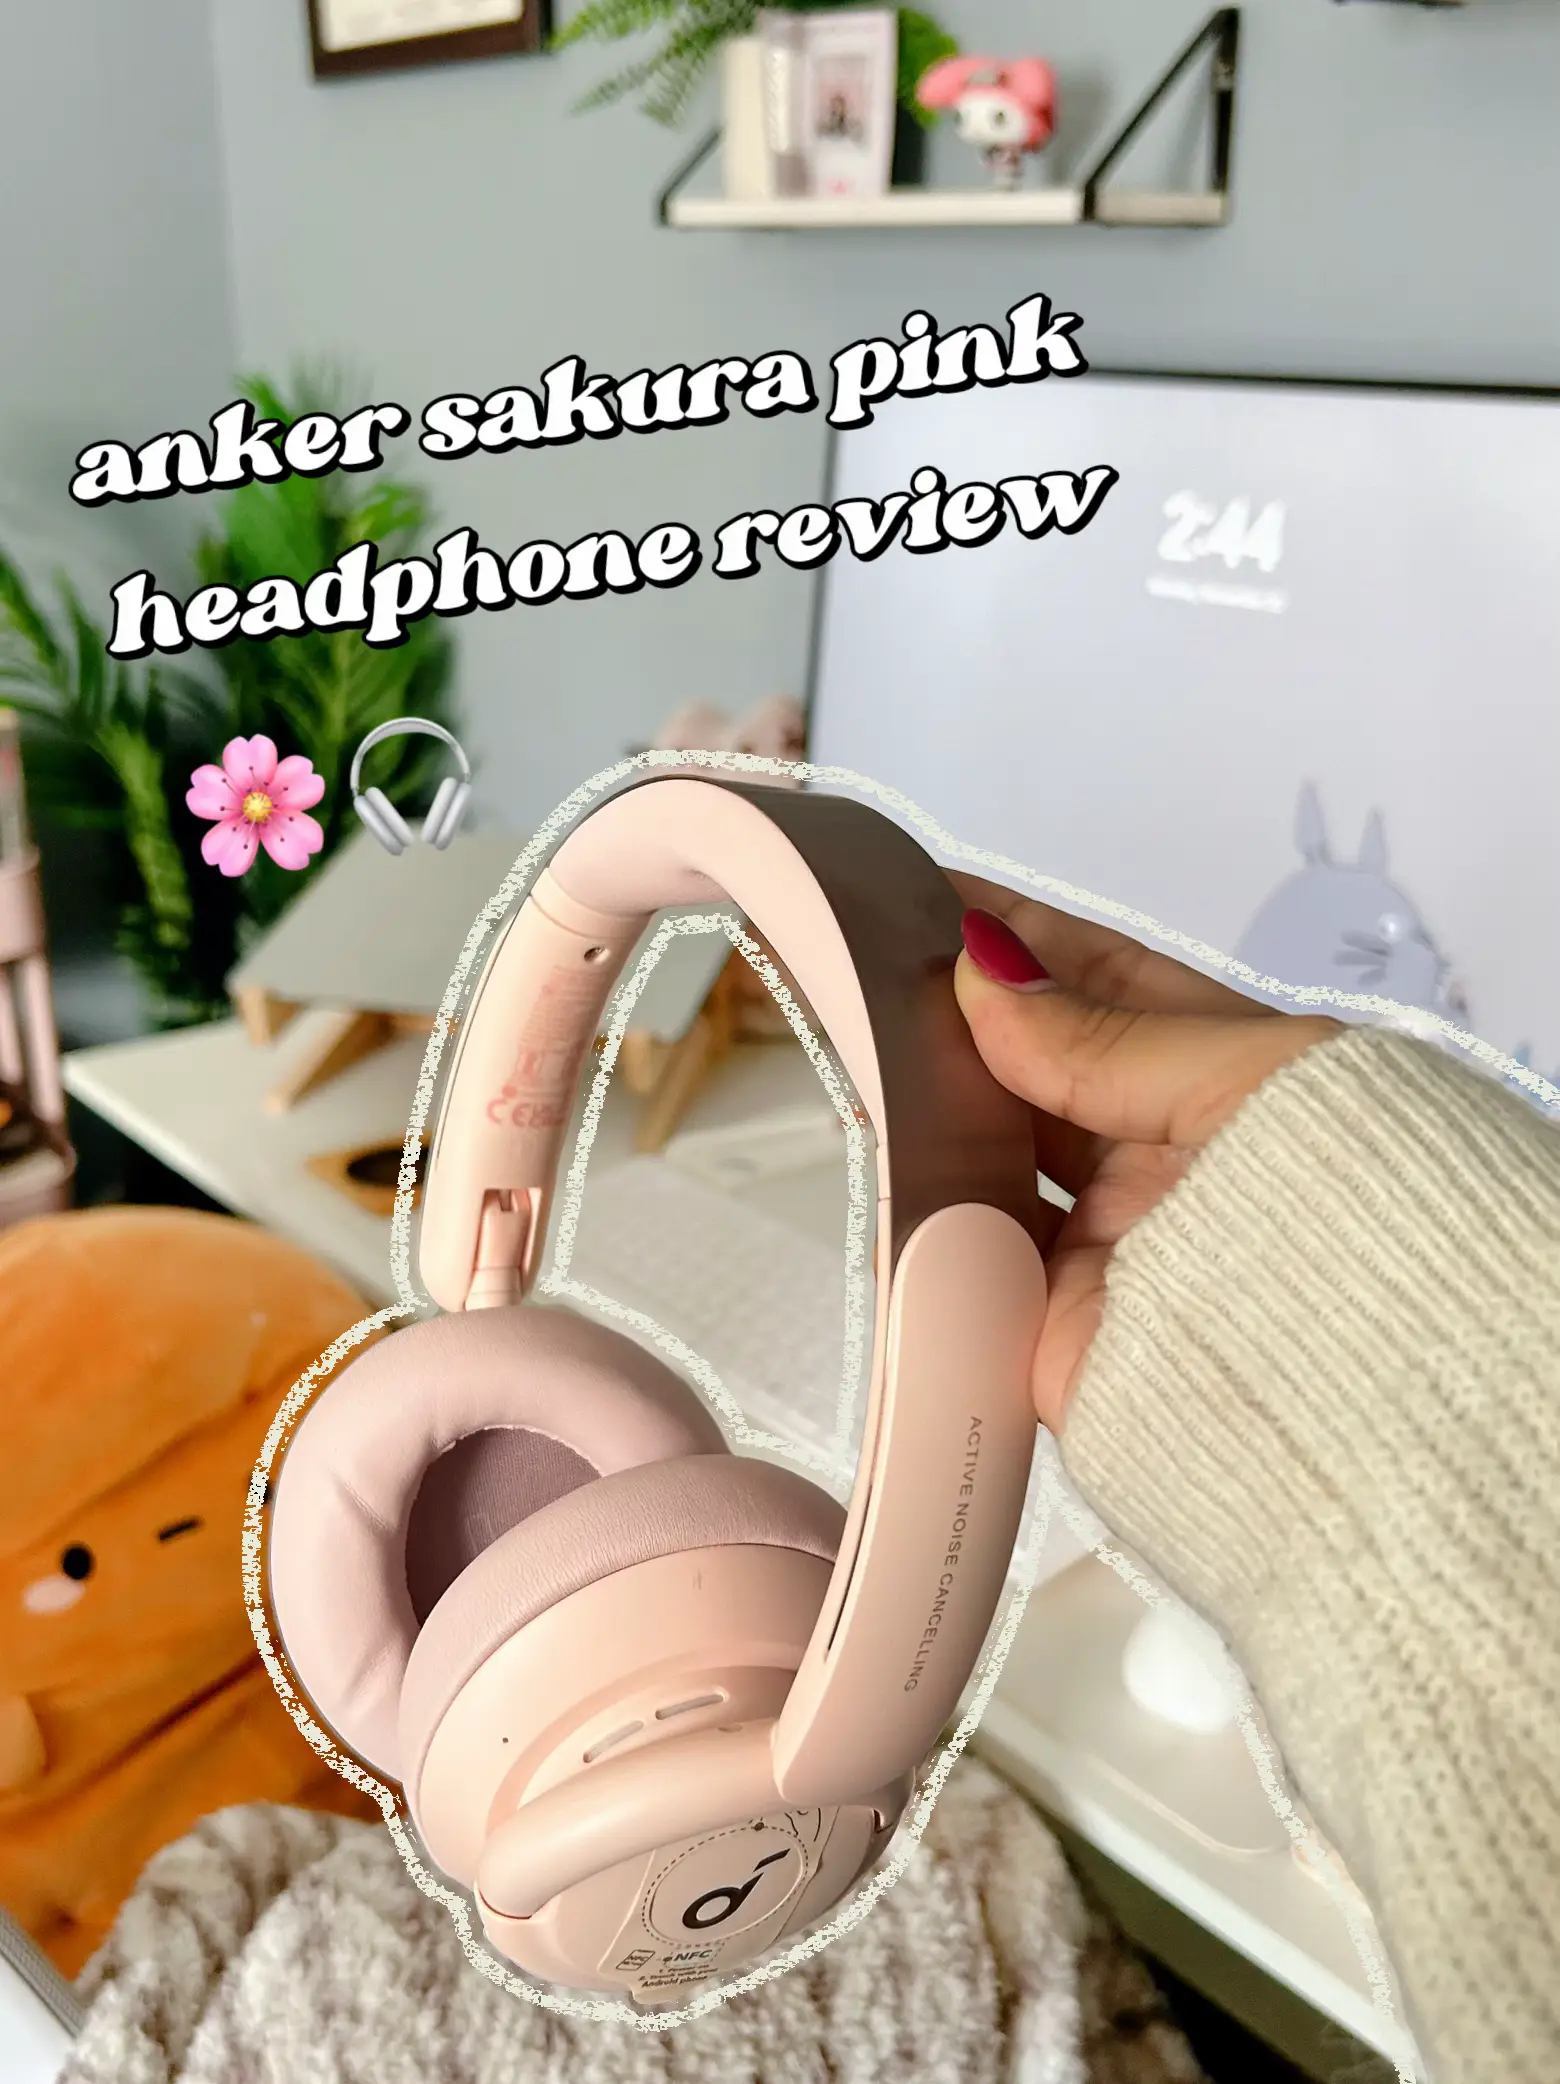 Just got my Anker Soundcore Q30 in Sakura Pink! I thought they